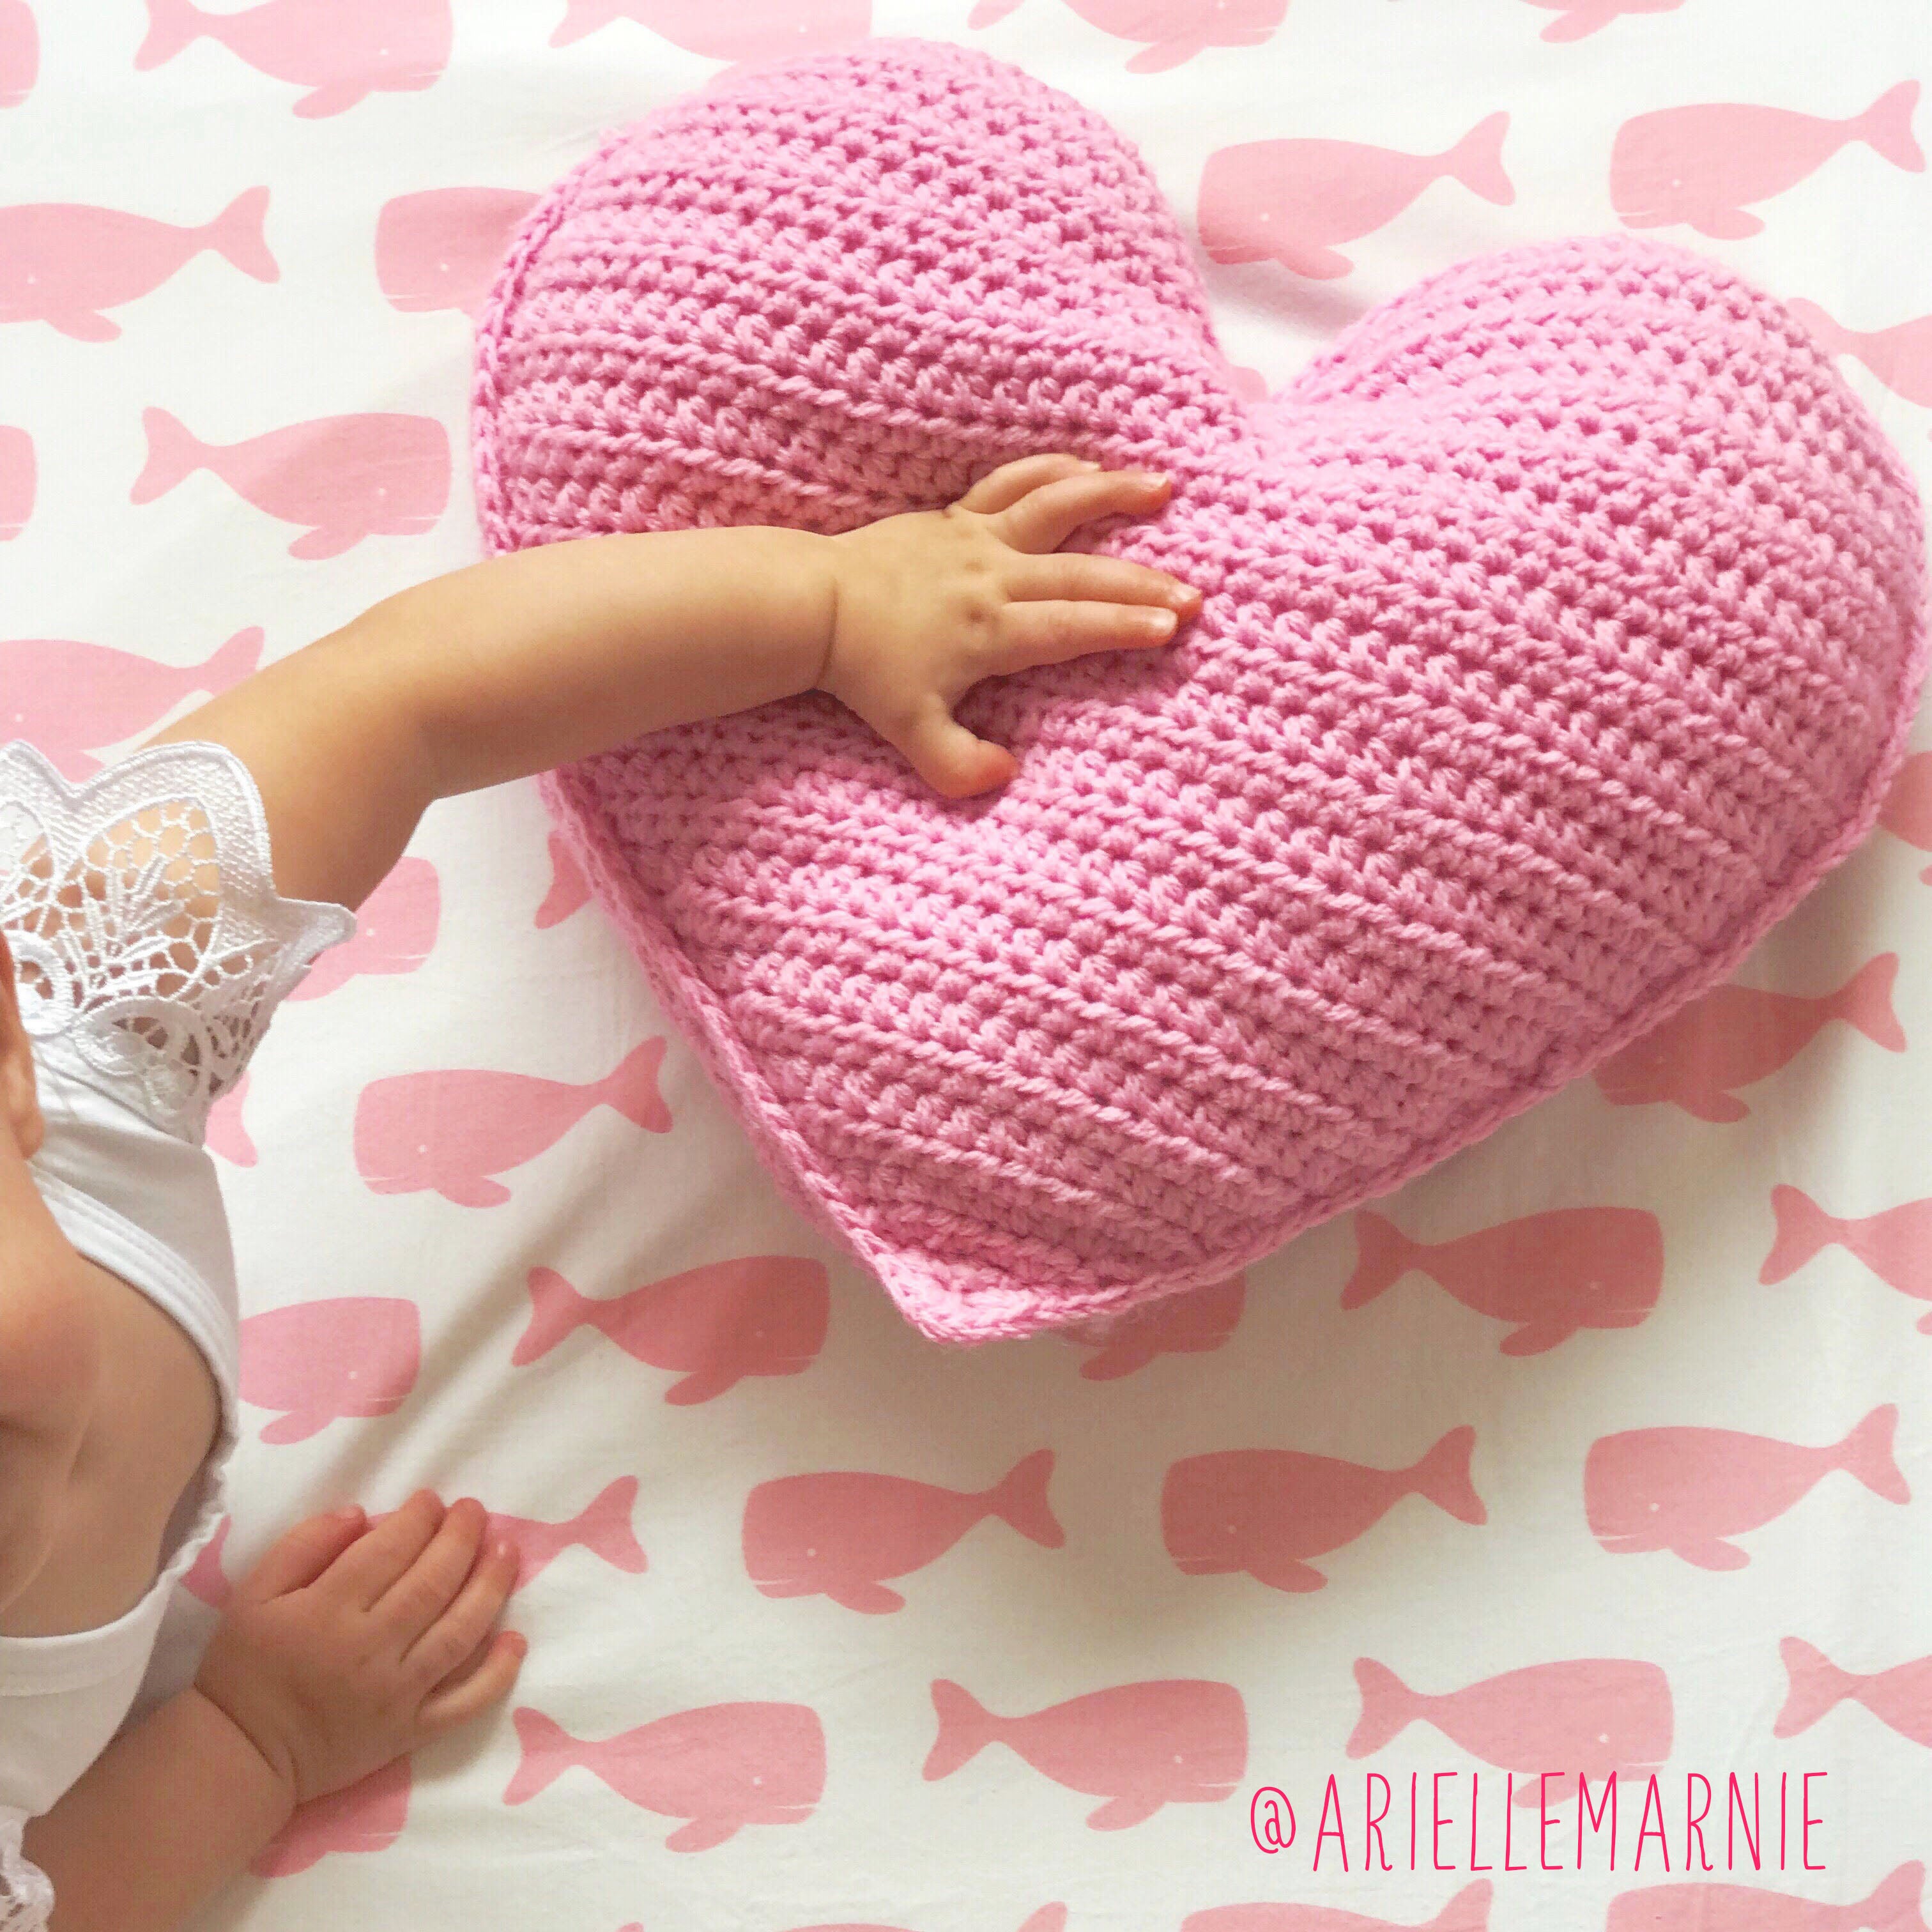 How To Hand Crochet a 10 Inch Heart